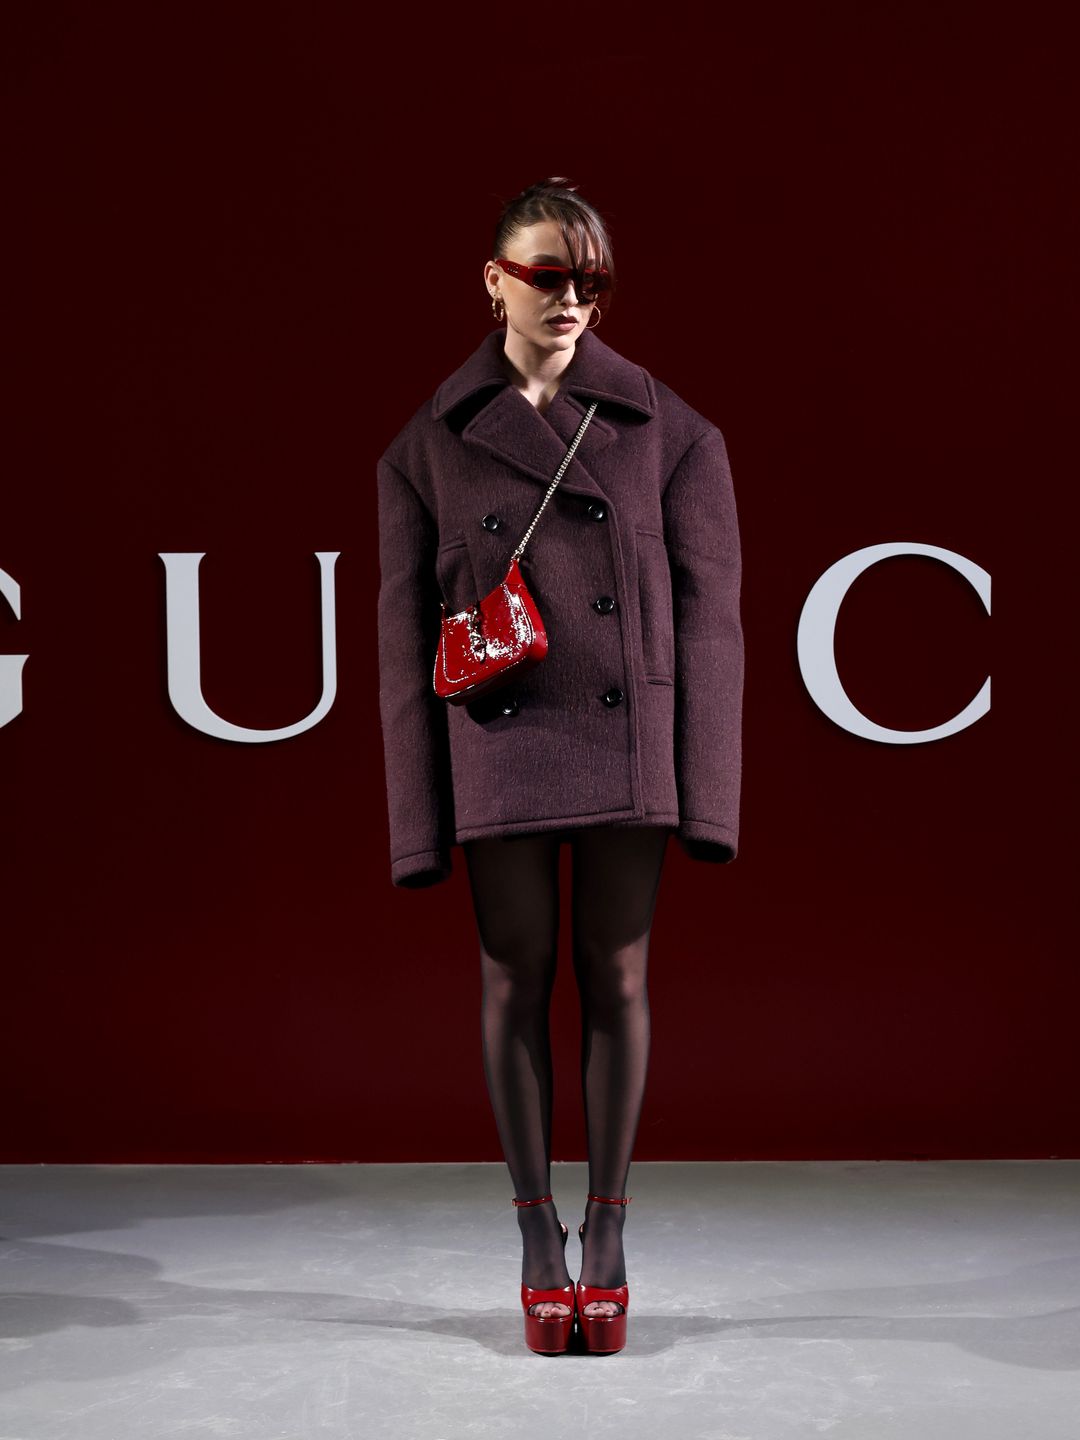 Emma Chamberlain attends the Gucci Women's Fall Winter 2024 Fashion Show during Milan Fashion Week  in a burgundy coat, sheer tights, red shoes and a red bag